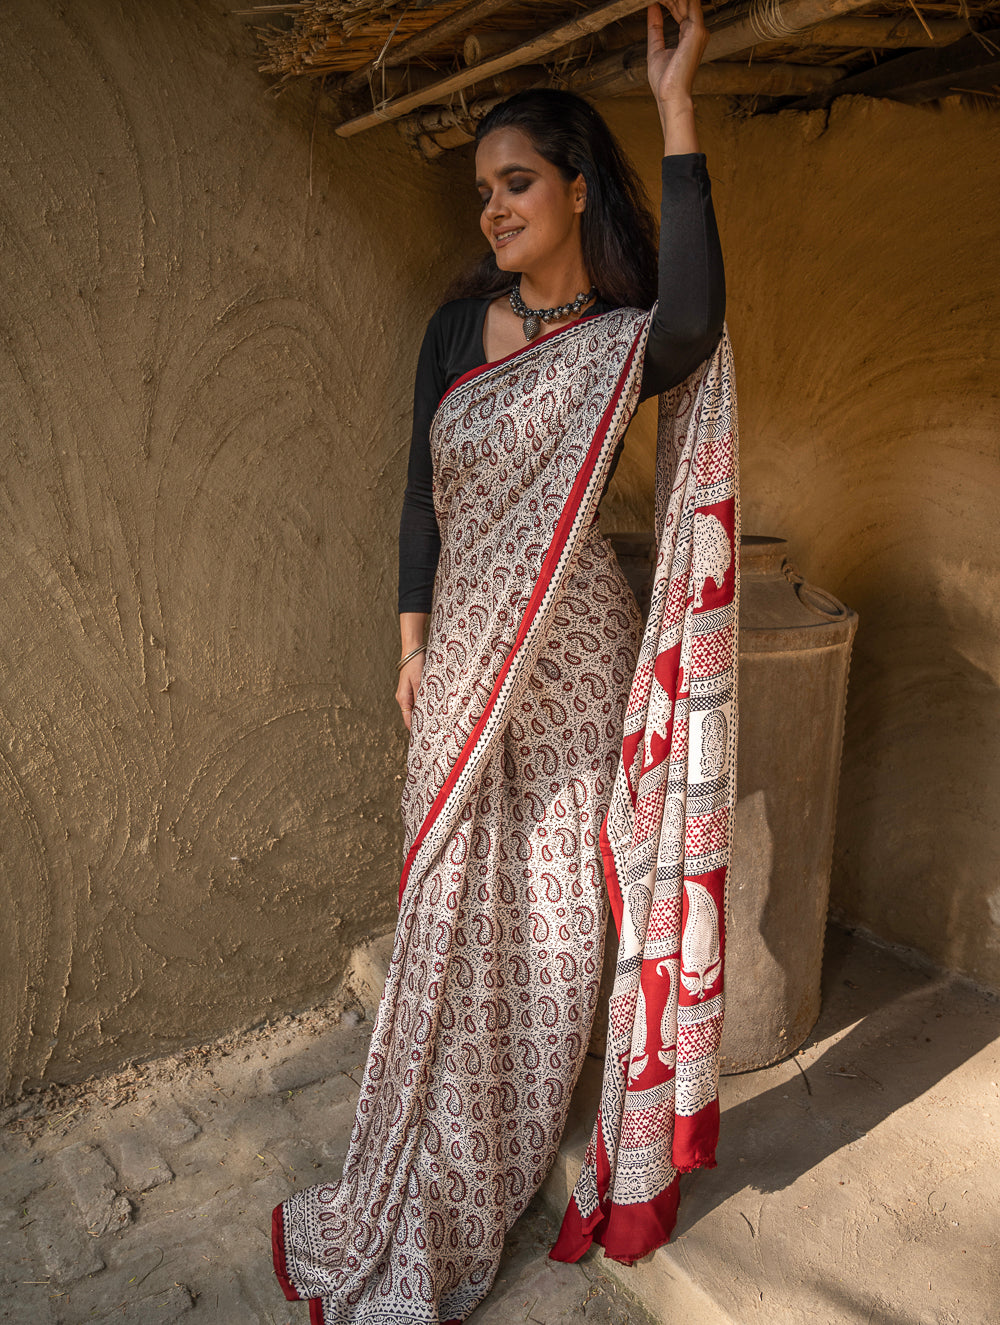 Load image into Gallery viewer, Exclusive Bagh Hand Block Printed Modal Silk Saree - White Paisleys 